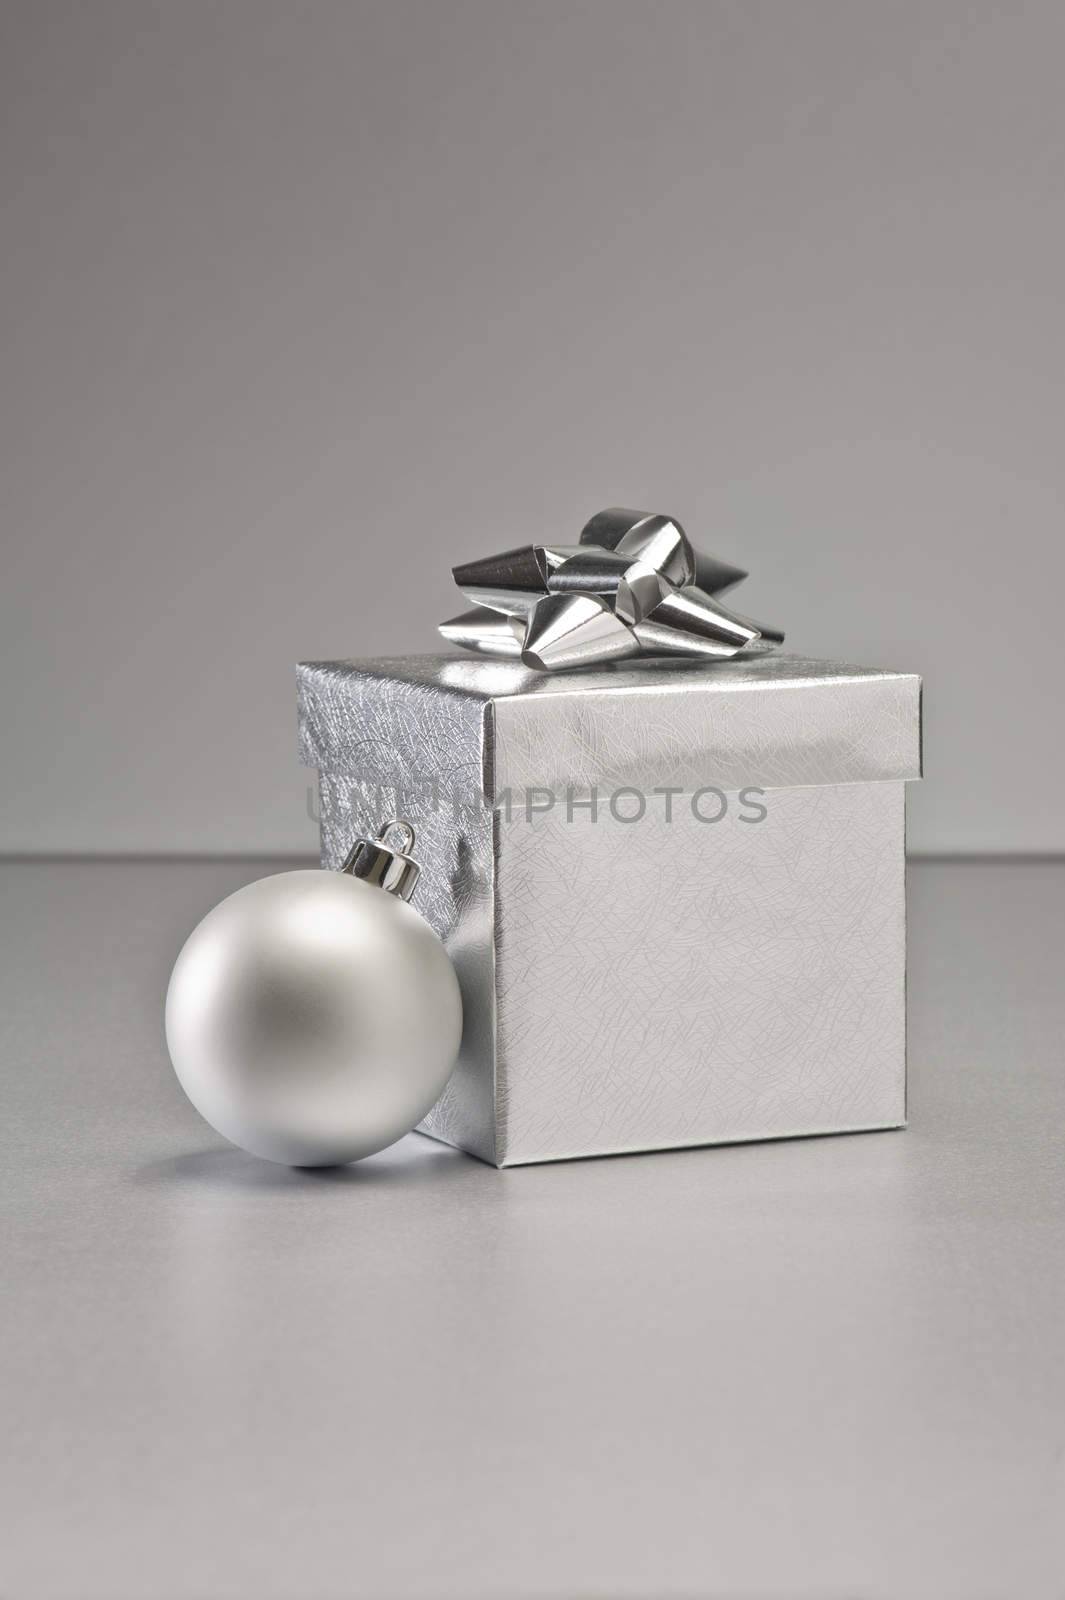 Silver bauble and present in Christmas setting